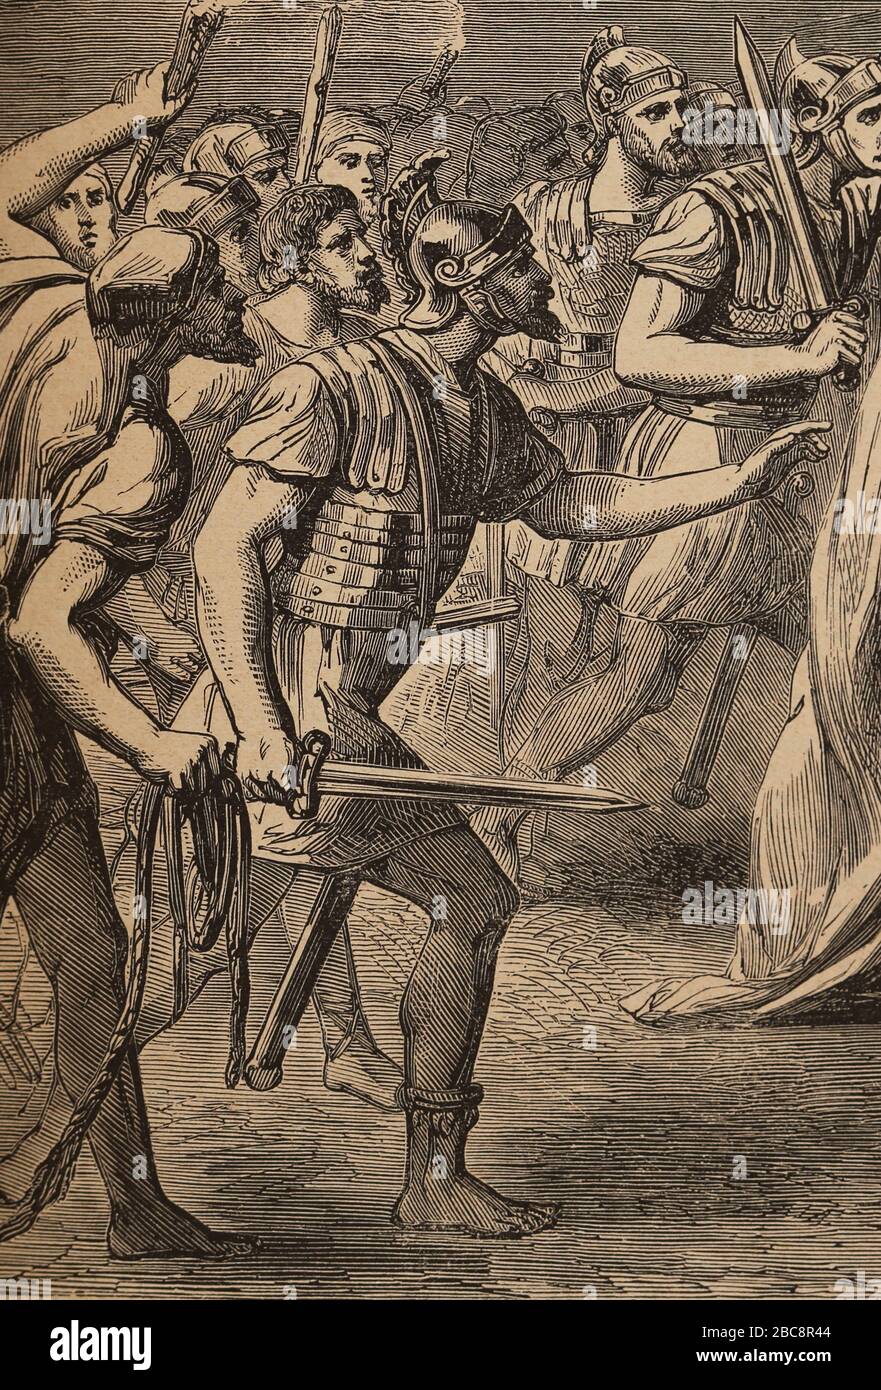 The arrest of Jesus in the Garden of Gethsemane. Detail of a roman soldier. Engraving. Holy Bible, 19th century. Stock Photo